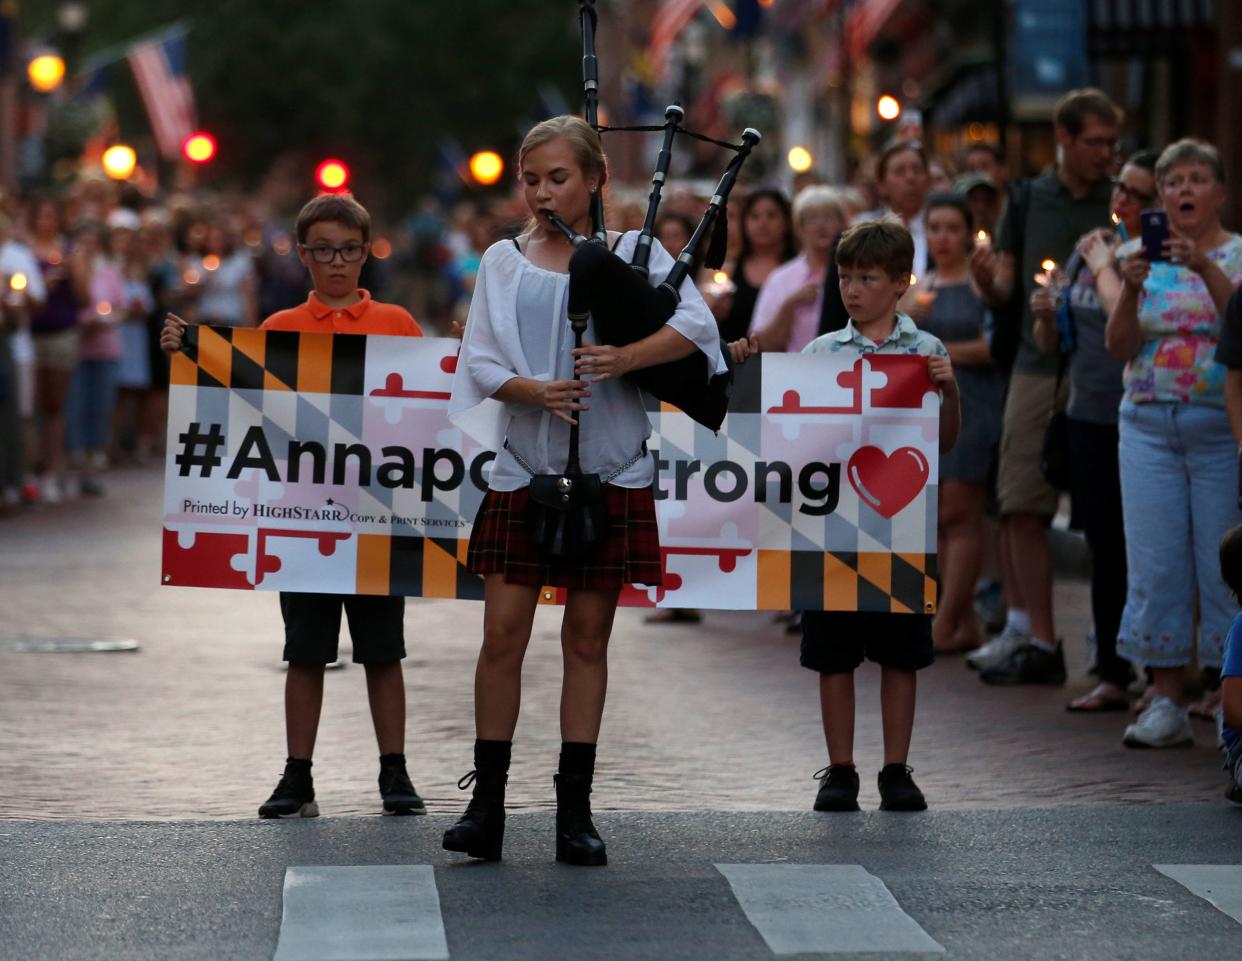 Bagpiper plays "Amazing Grace" at Annapolis march and vigil for victims of the shooting Thursday at the Capital Gazette. (Photo: Reuters/ Leah Millis)